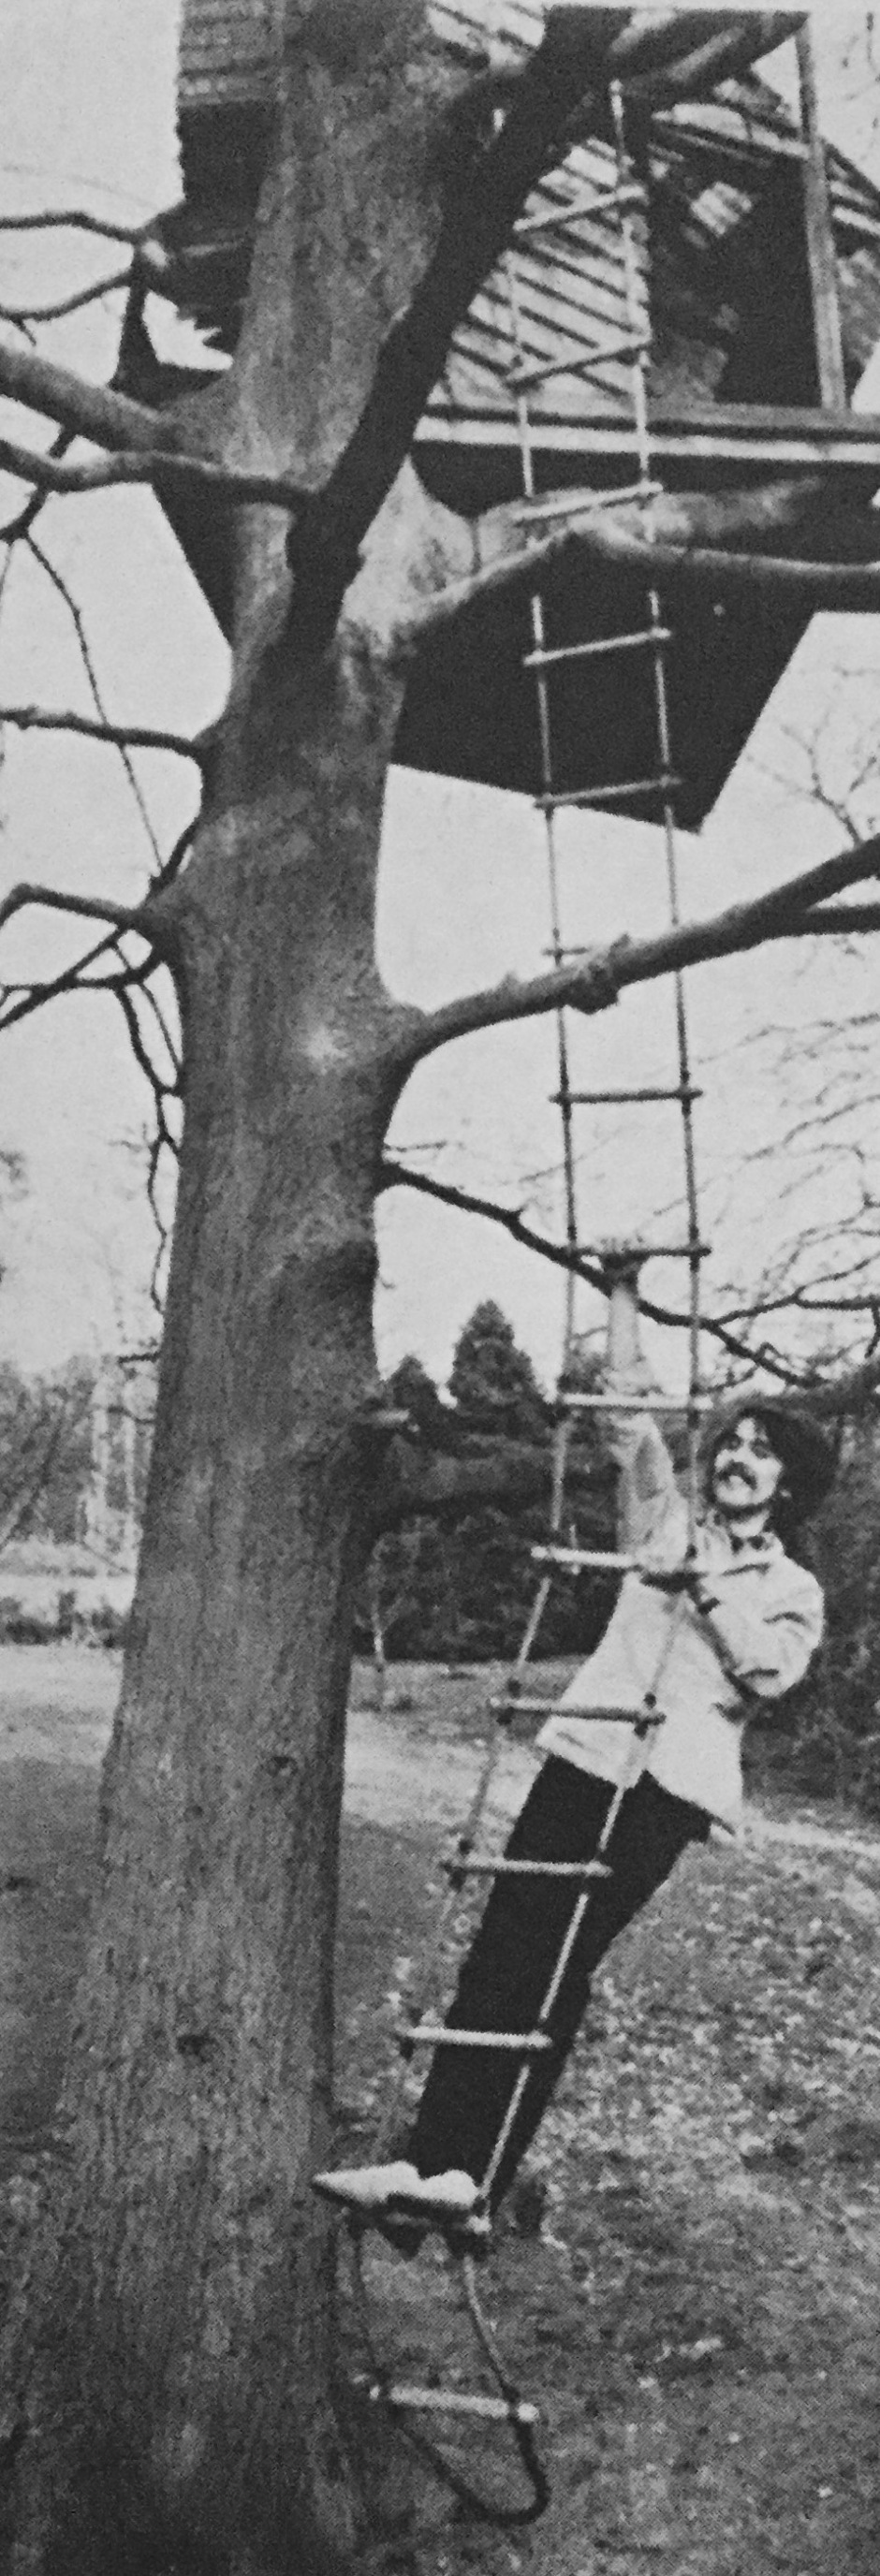 At Ringo's home, the Beatles social centre, George climbs up to the tree house where Ringo likes to sit and think.